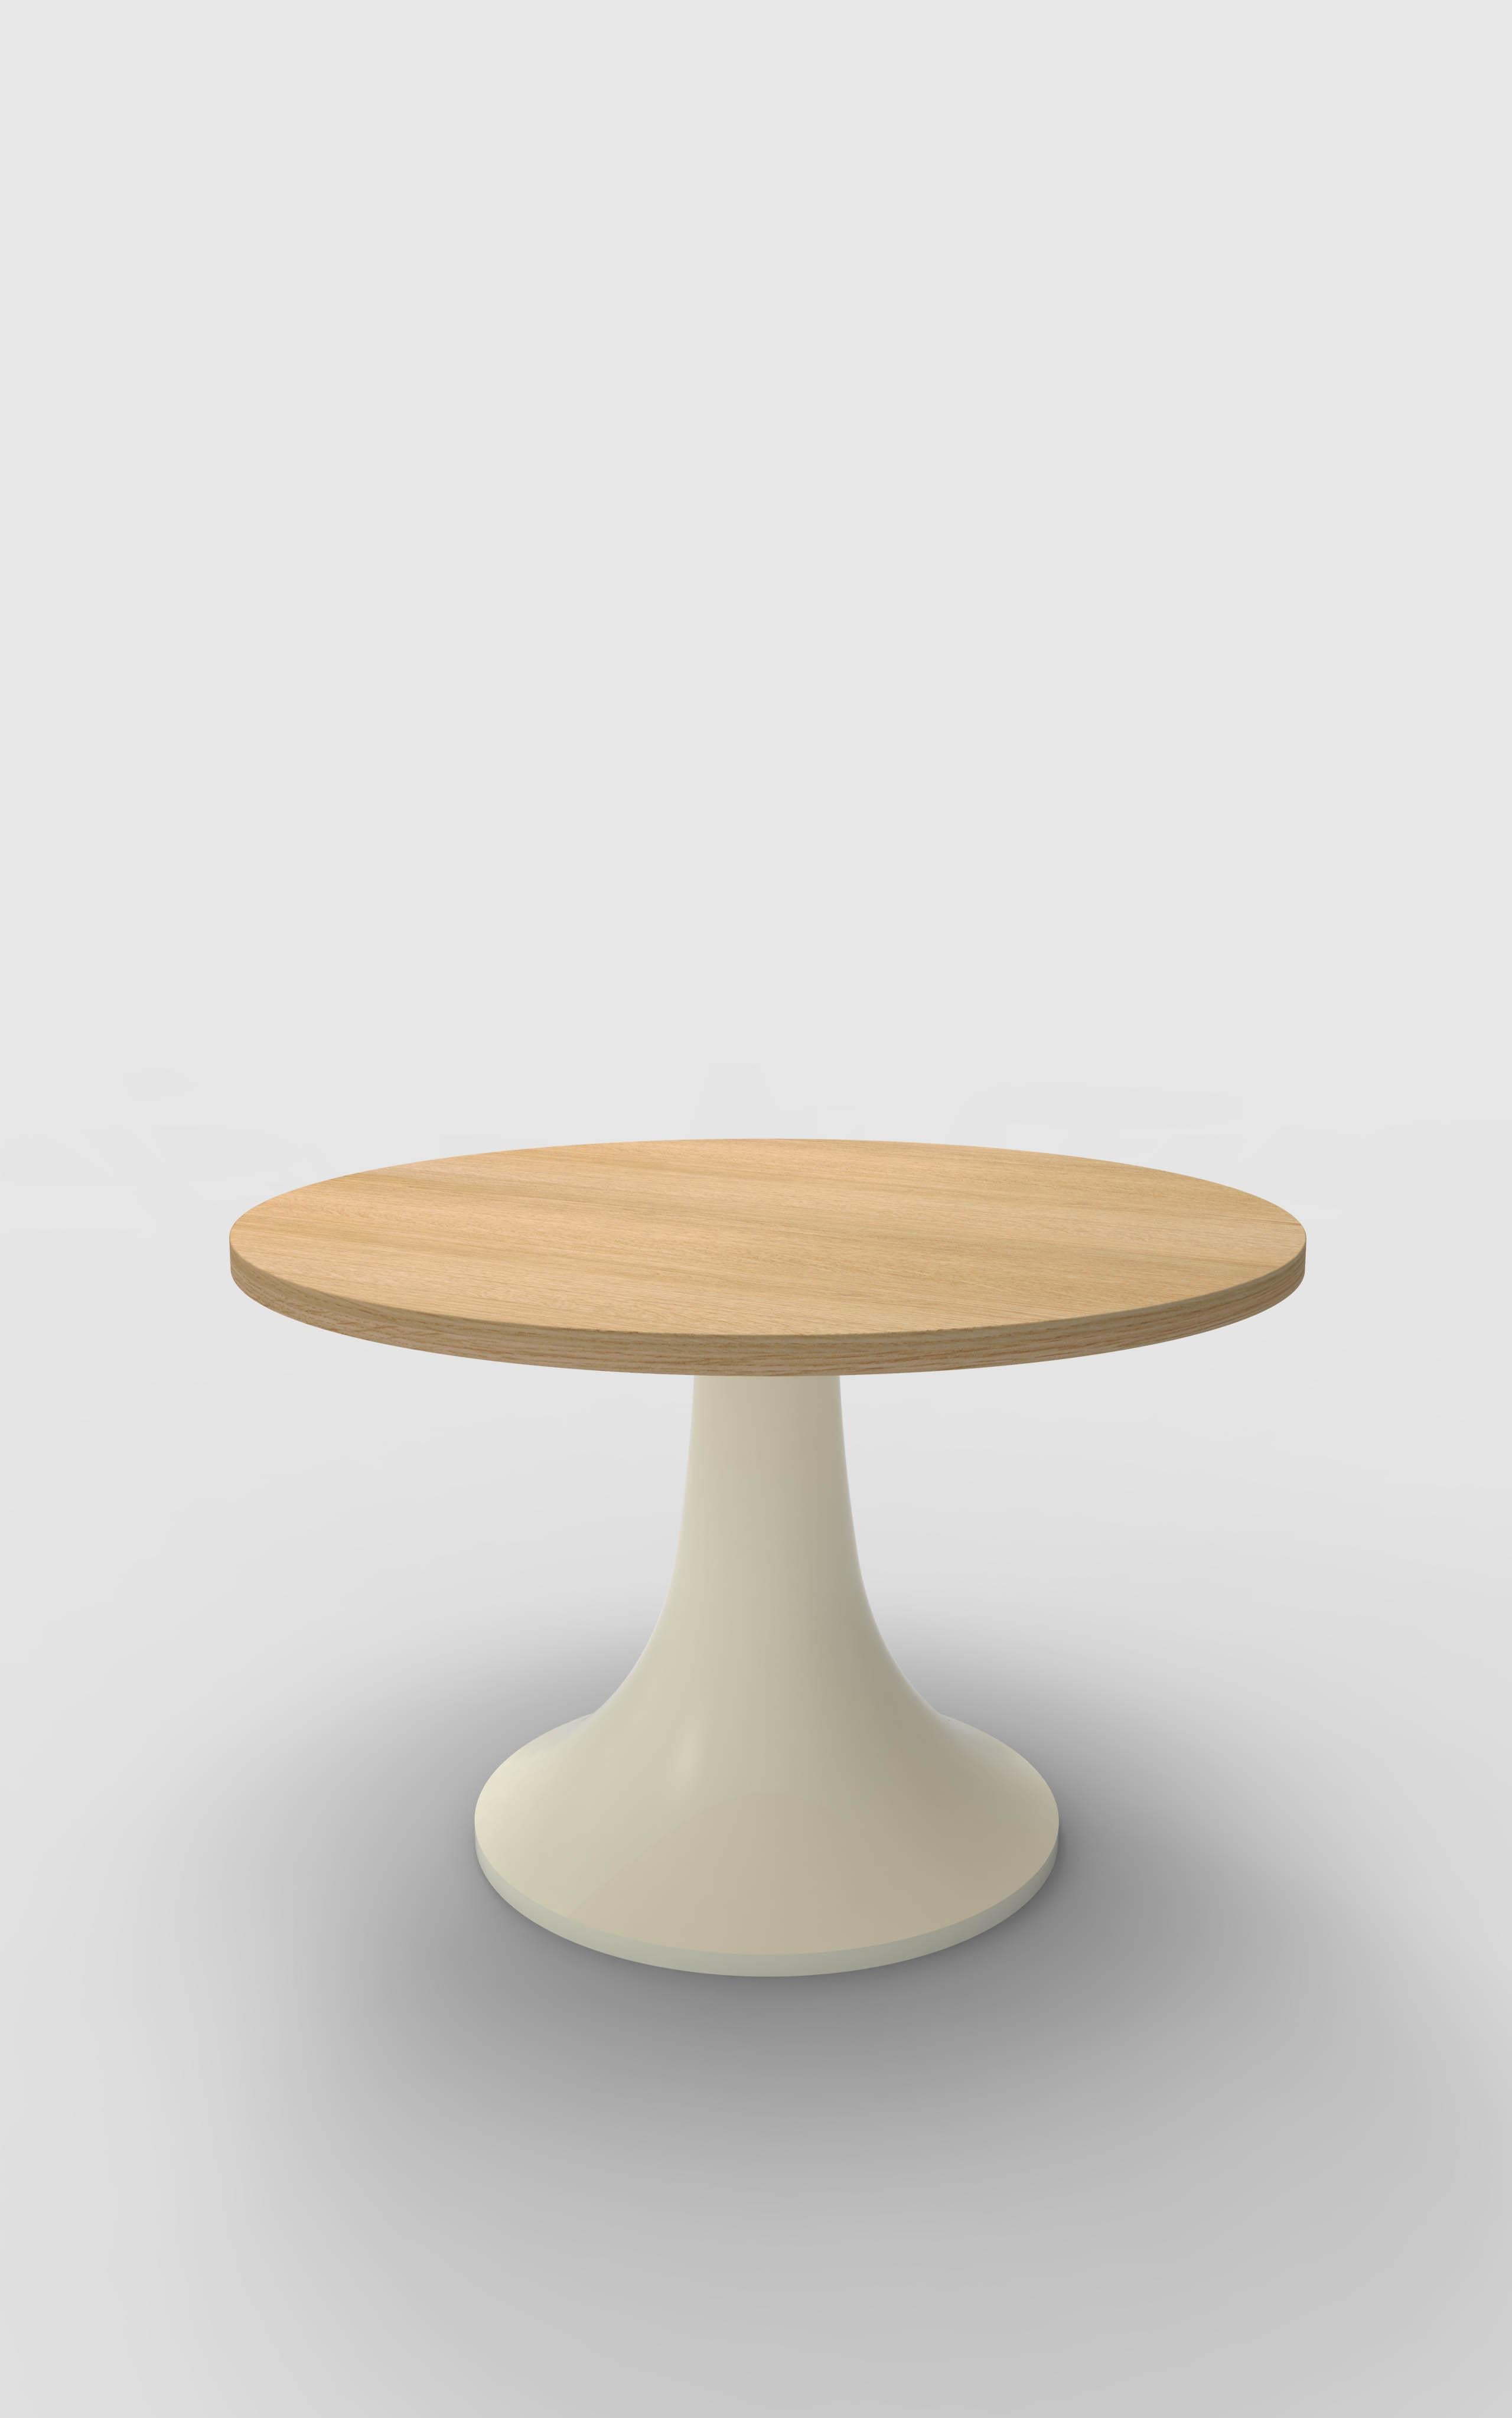 Orphan work 200 Dining Table
Shown in oak with white.
Available in natural oak with painted base.
Measures: 48